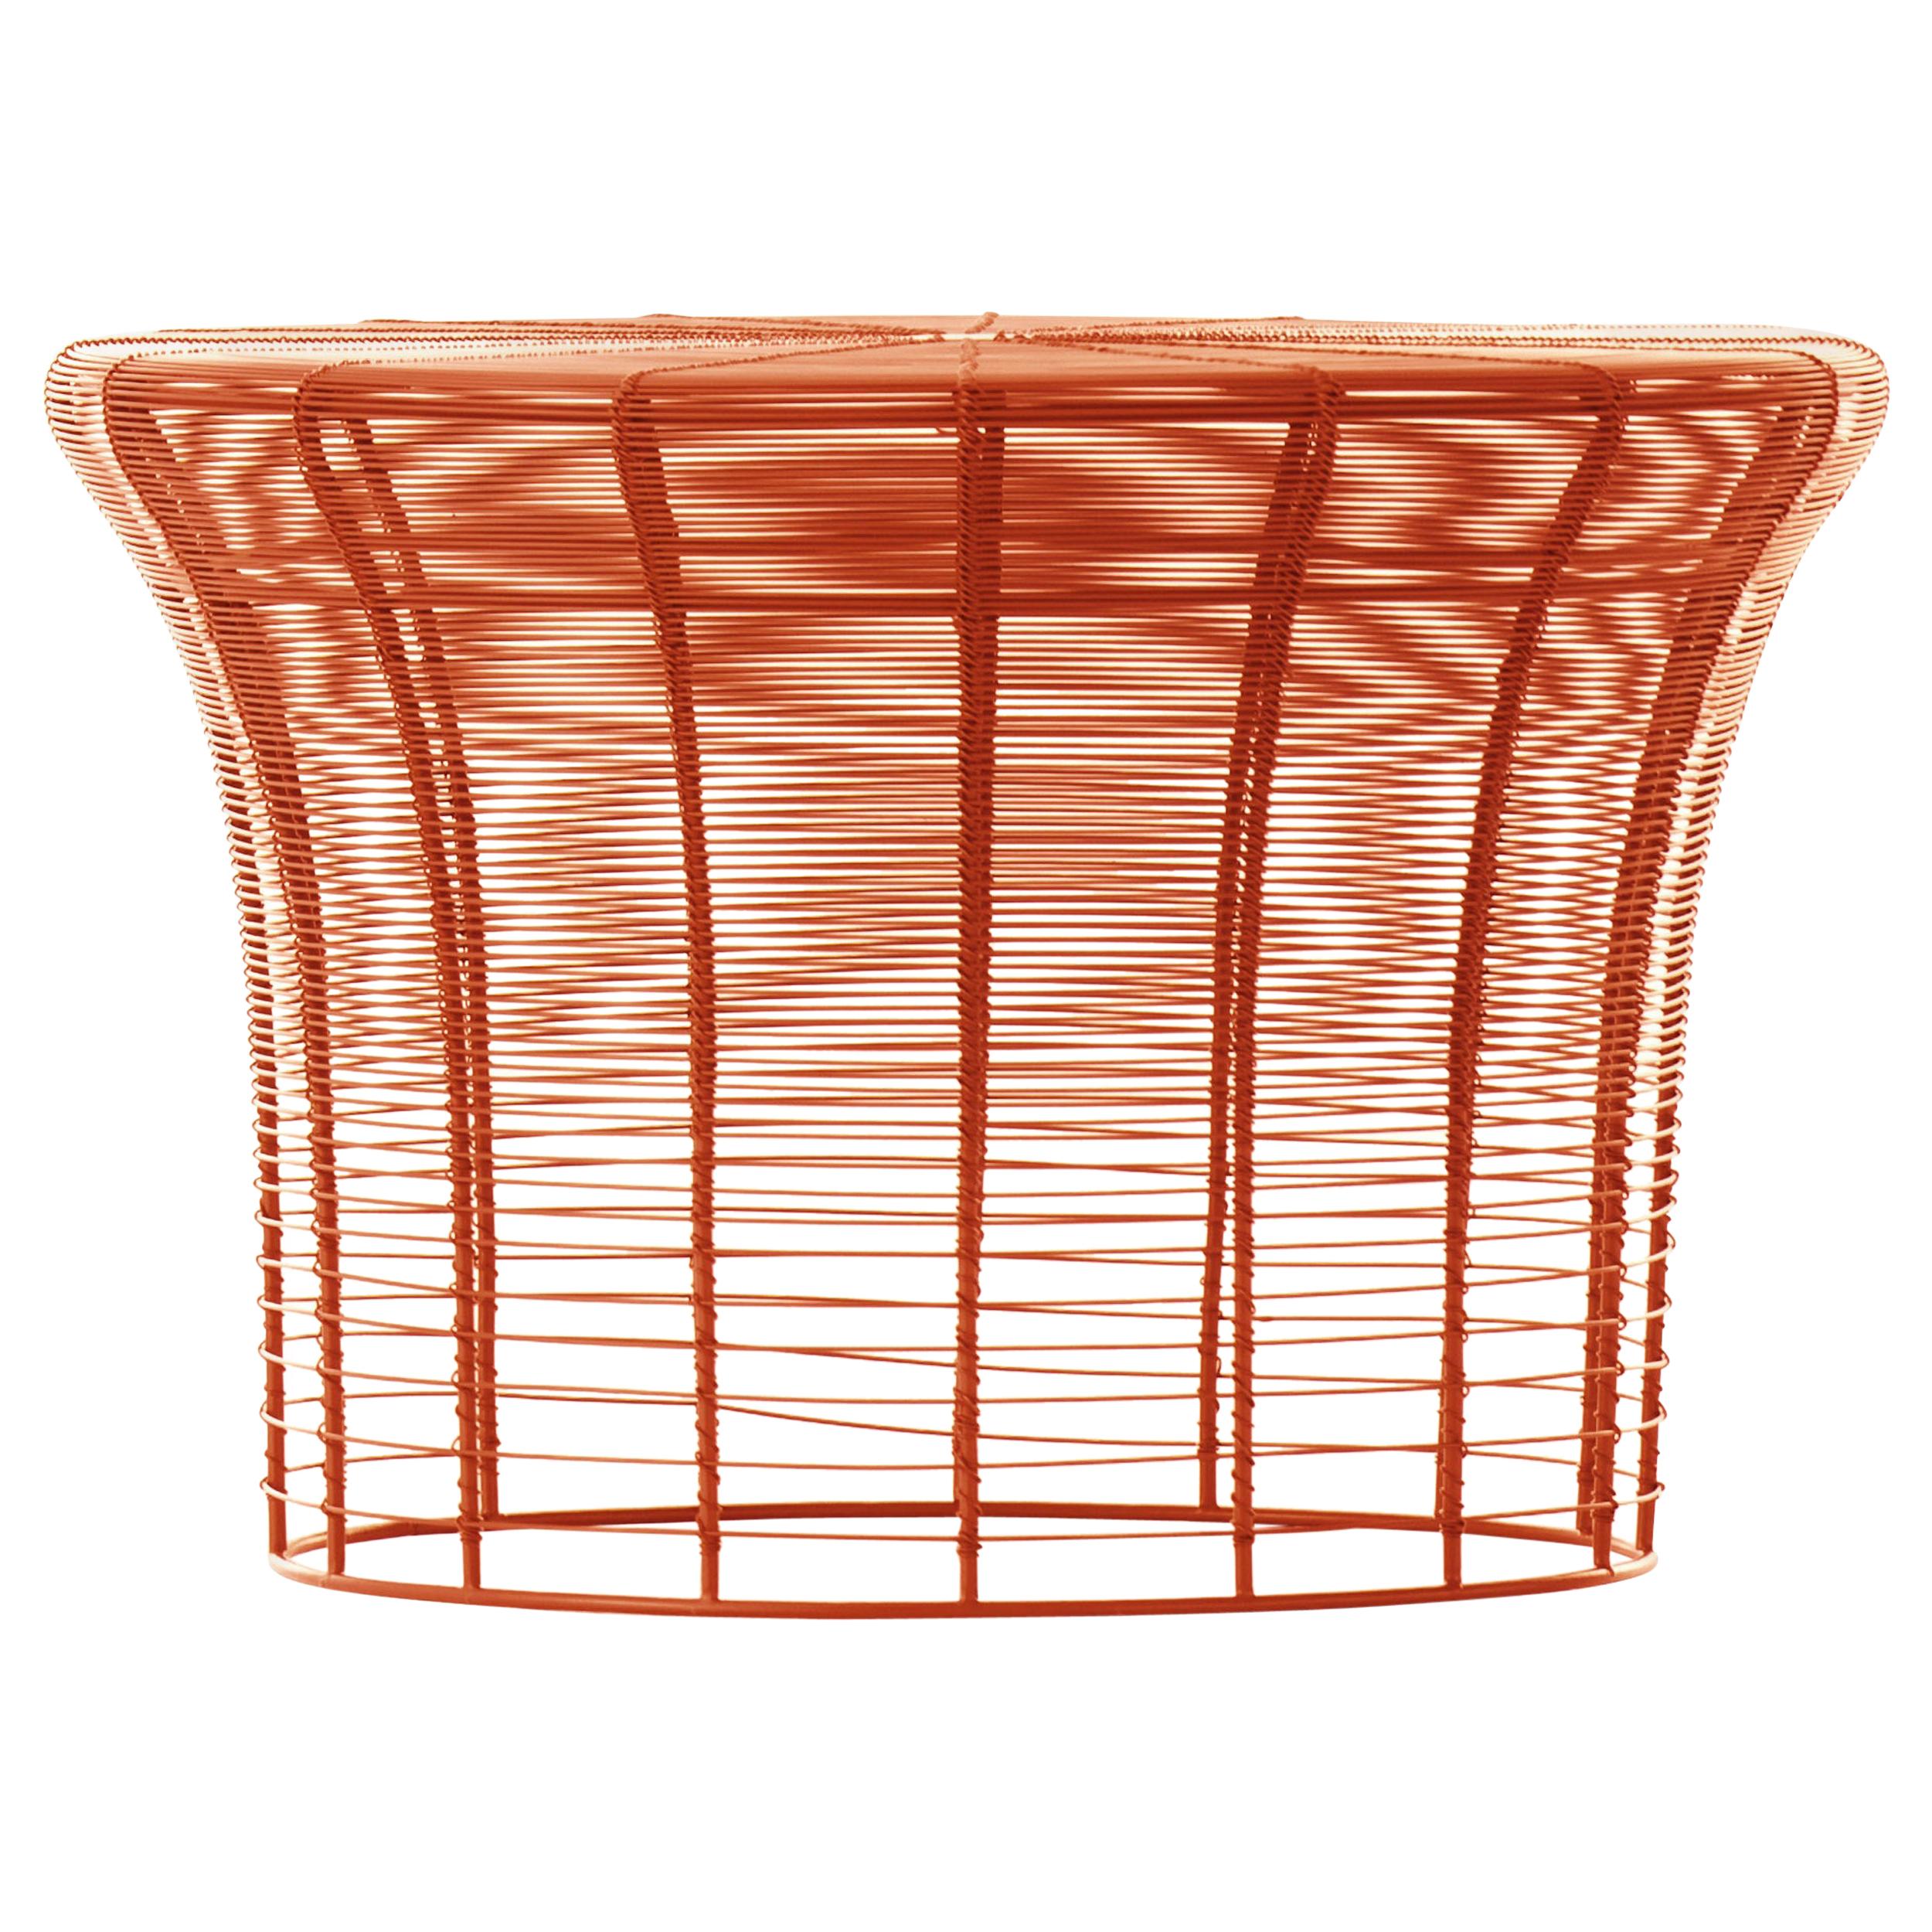 GAN Aram High Table in Red and Orange by Nendo For Sale